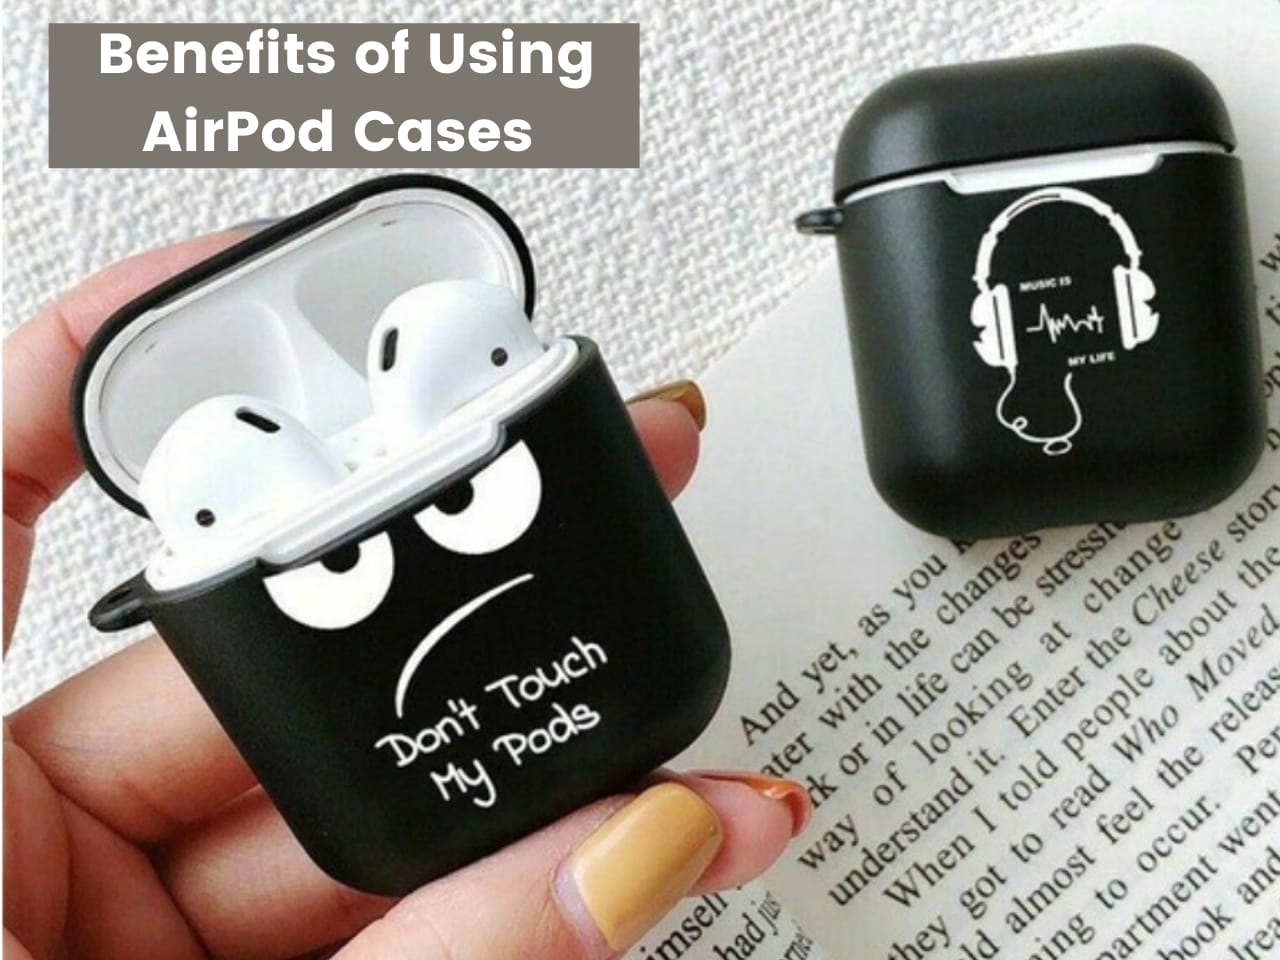 airpods cases uses and advantages